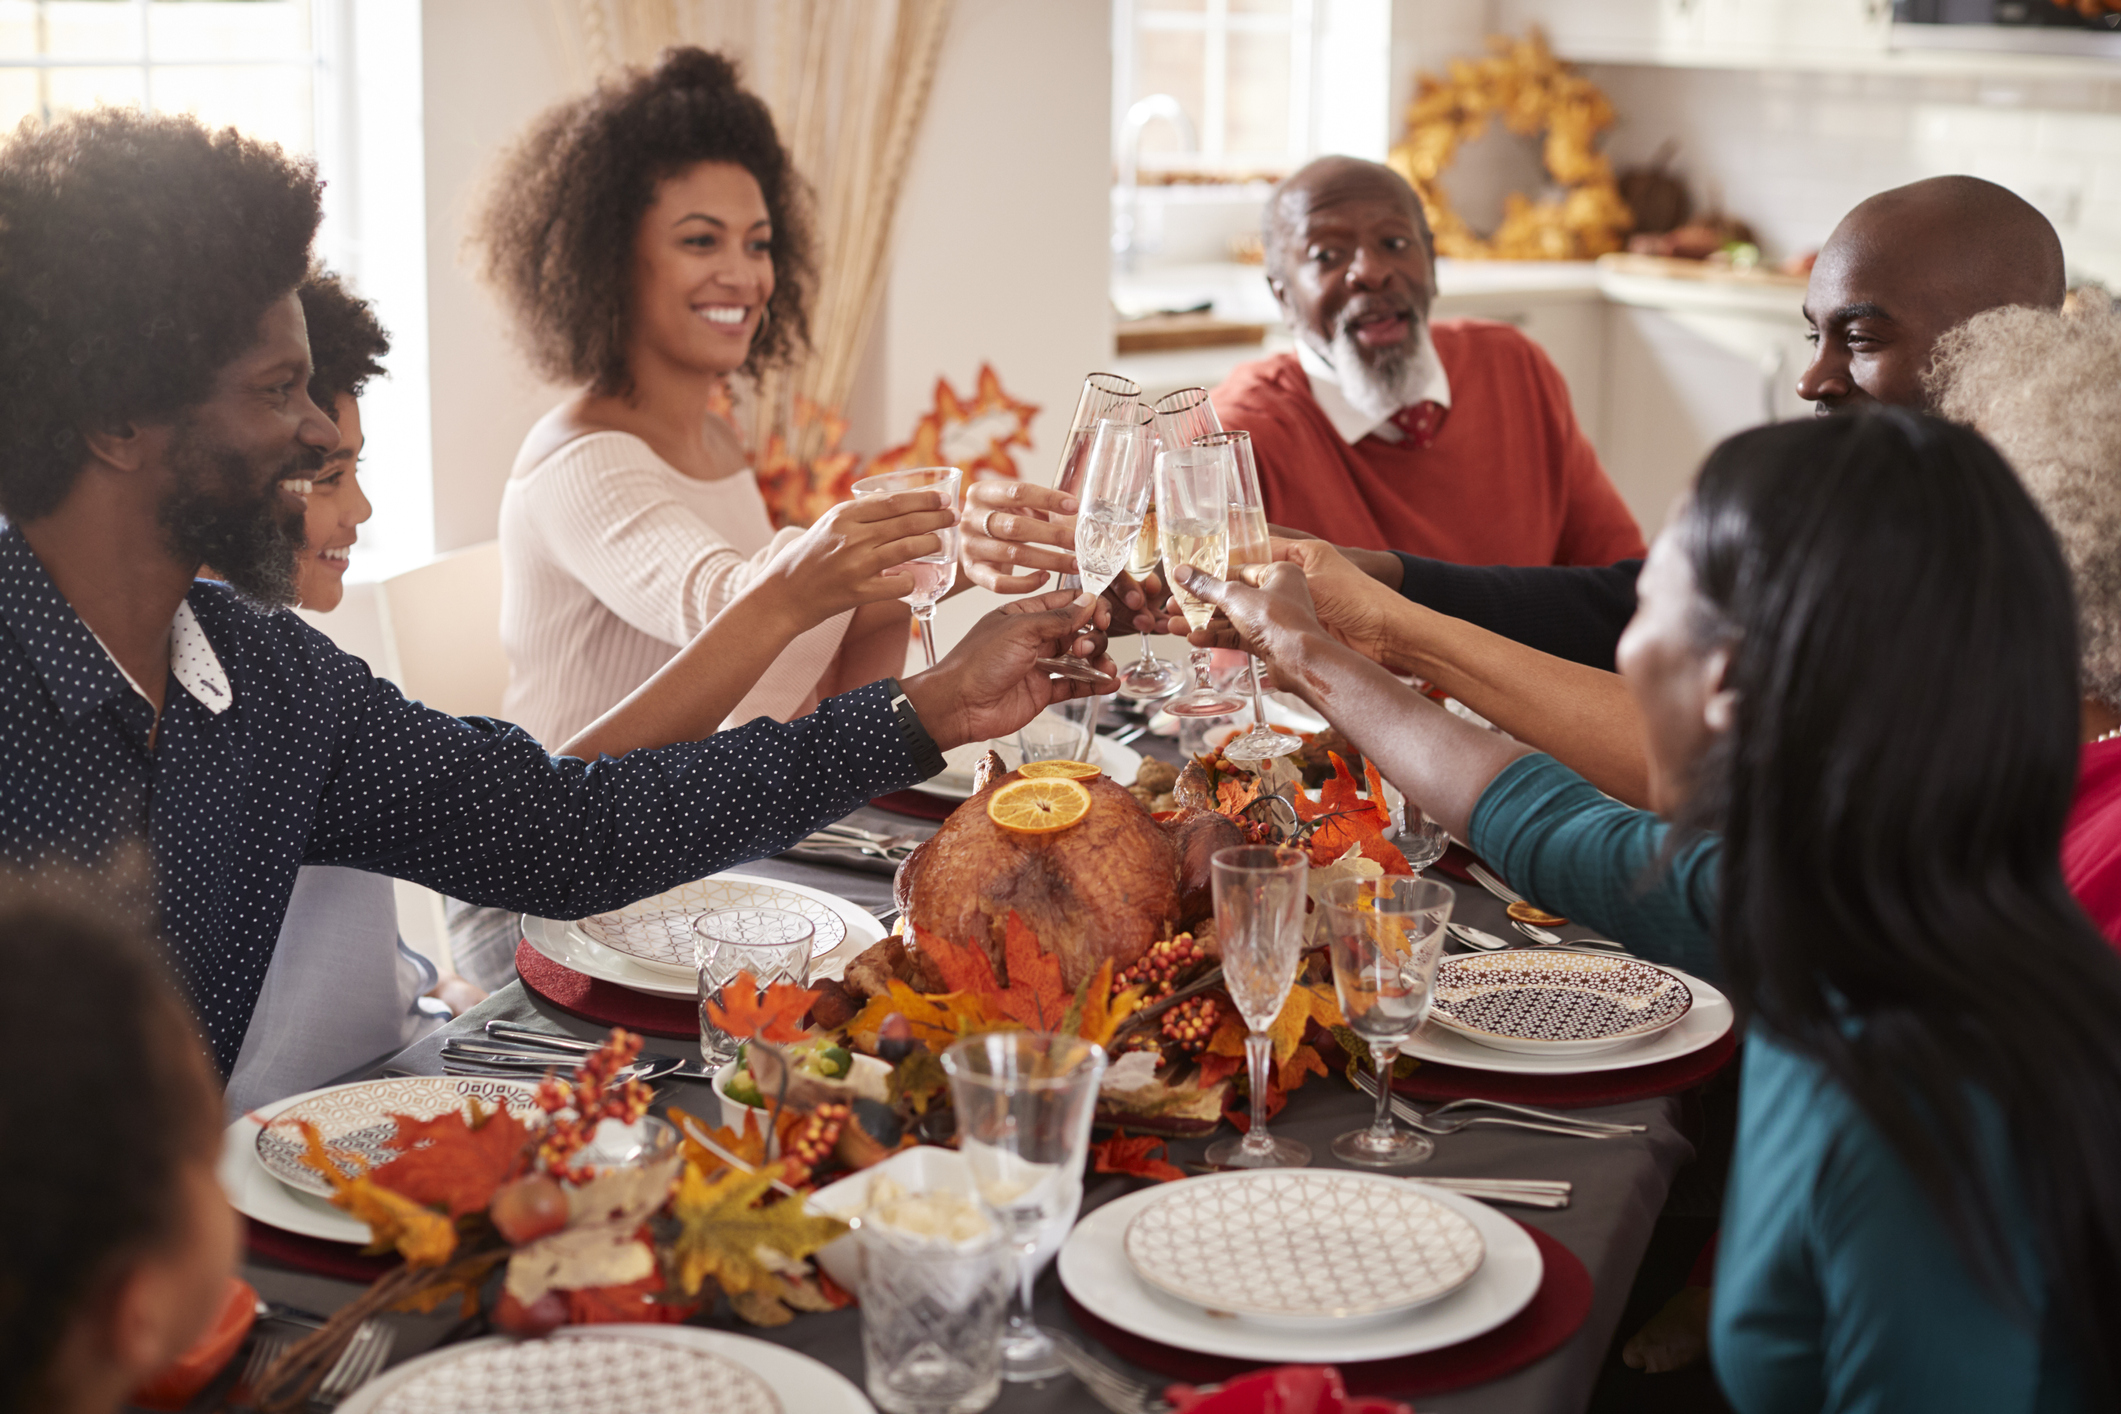 Simple Steps to Prepare Your Home for Holiday Entertaining